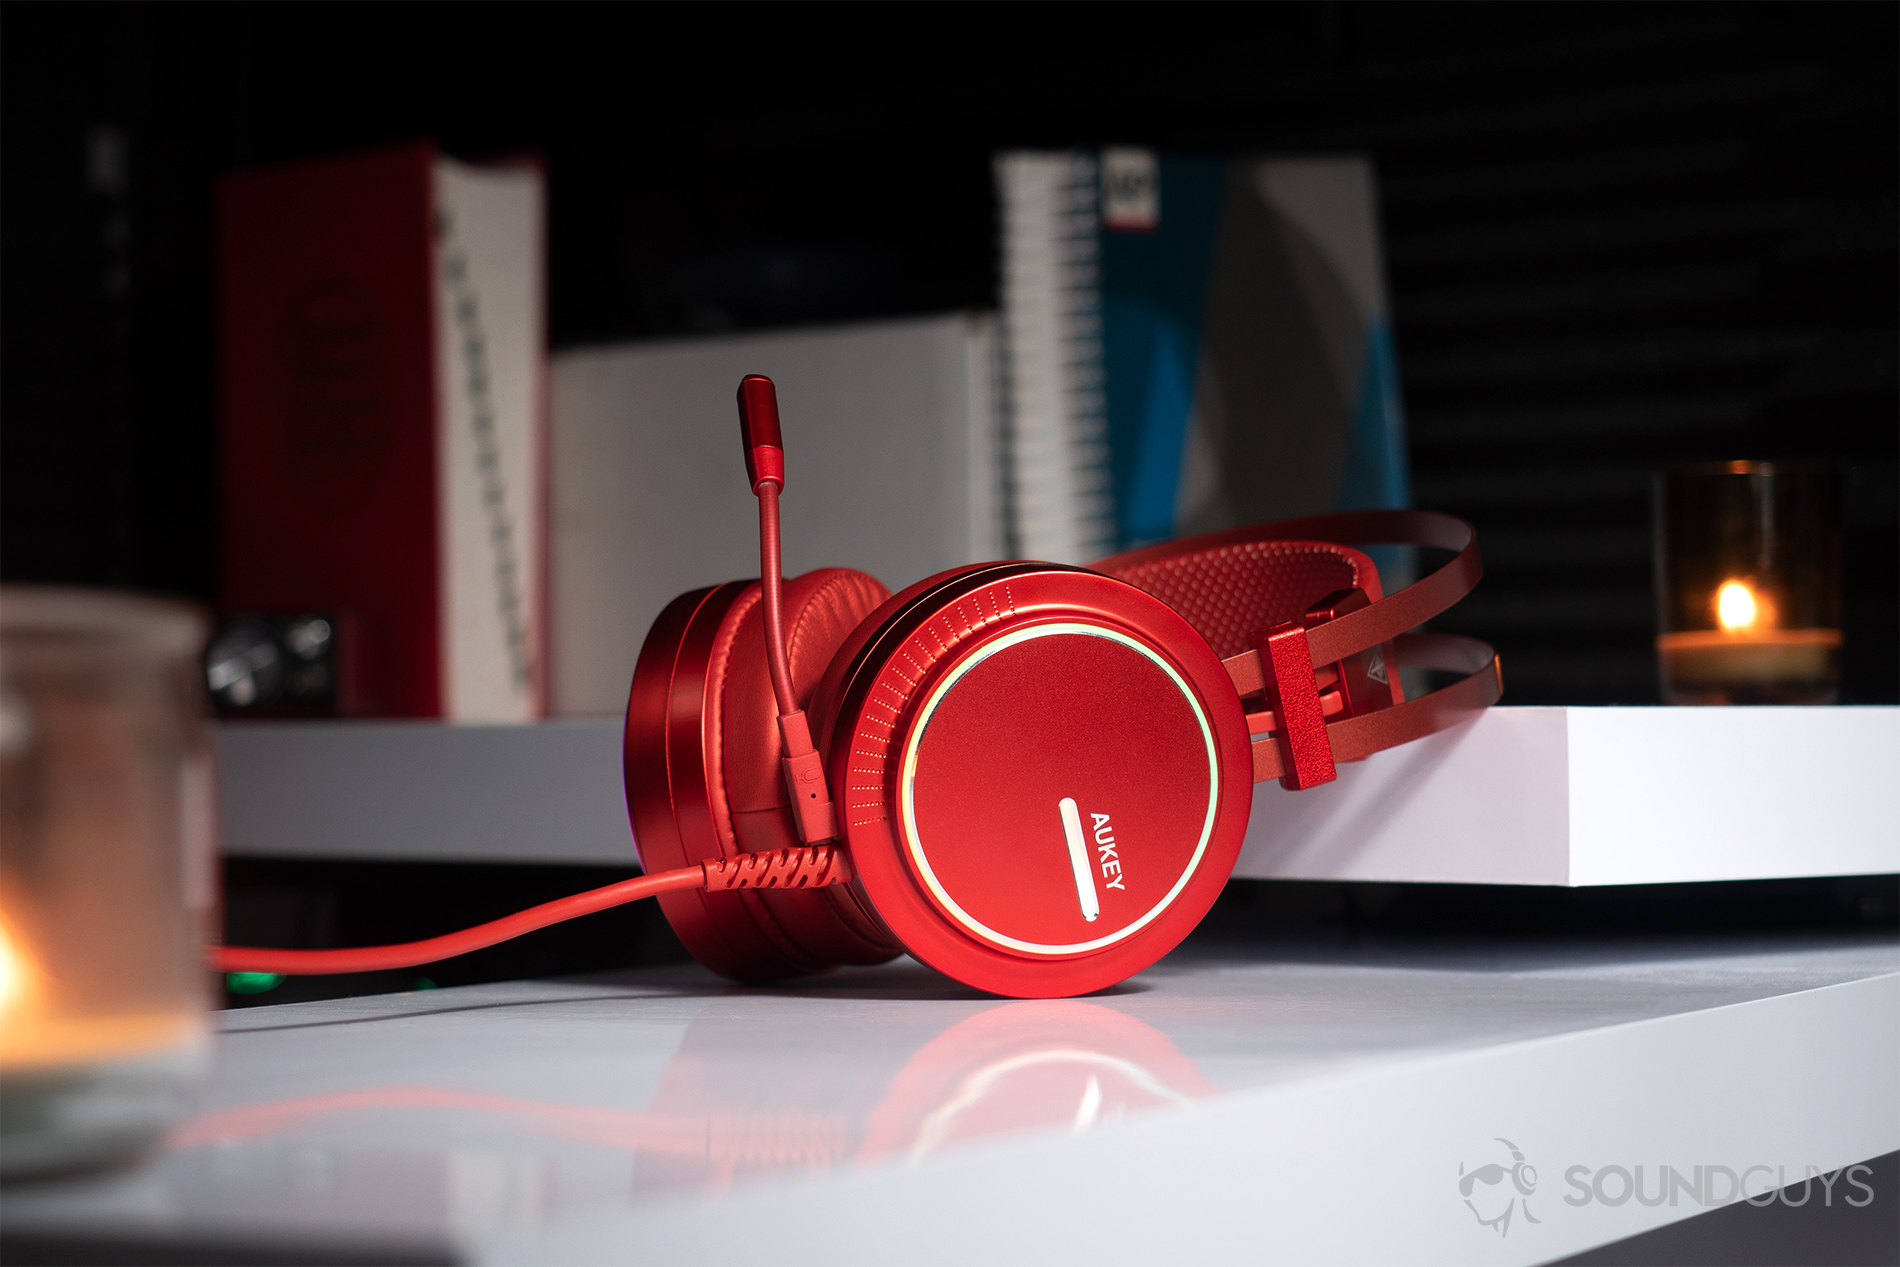 Aukey 7.1 Gaming Headset: the headphones resting on a white desk.